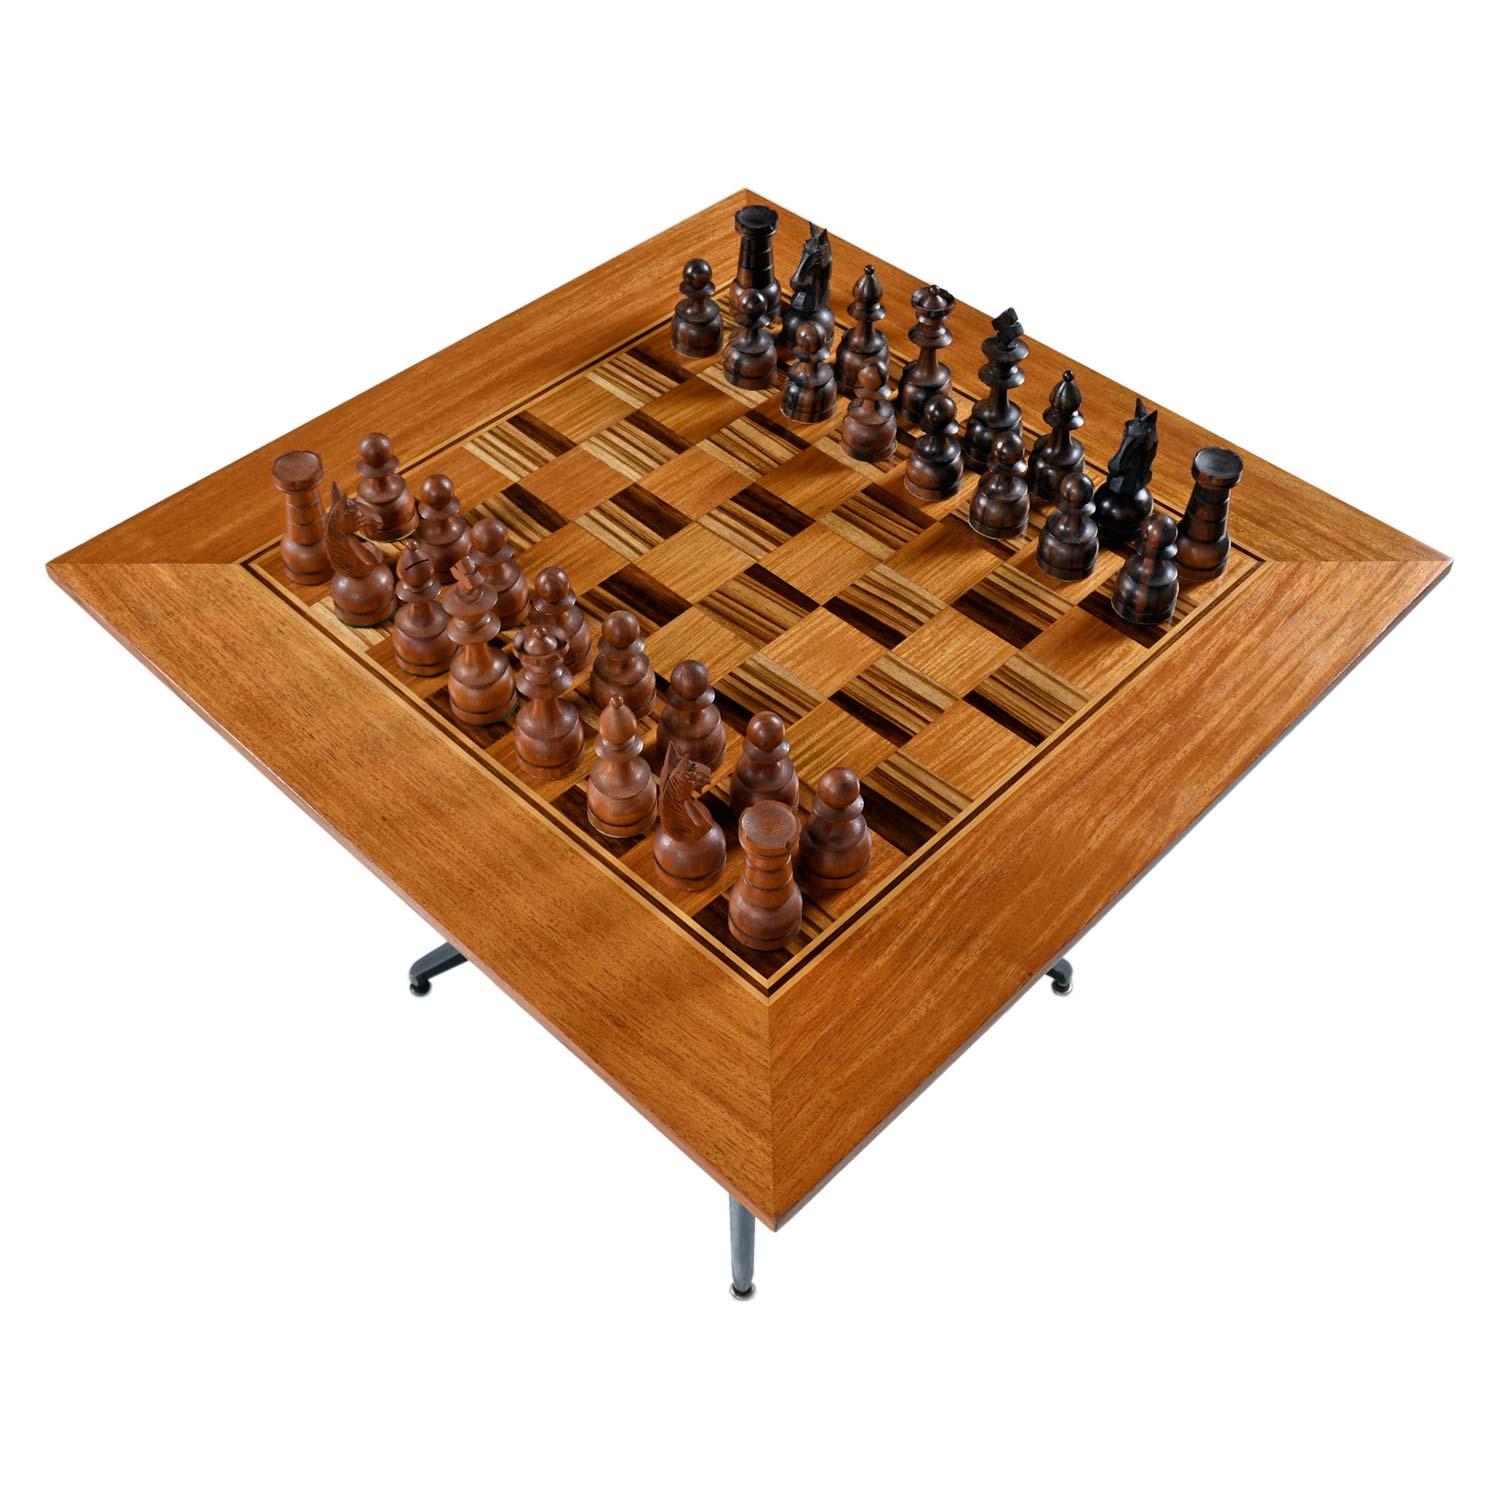 This spectacular chess table set is one of a kind. The game board is a magnificent creation of checkerboard pattern Macassar ebony and teak wood. The striped ebony is absolutely stunning and is tempered by the honey colored teak. The perimeter of